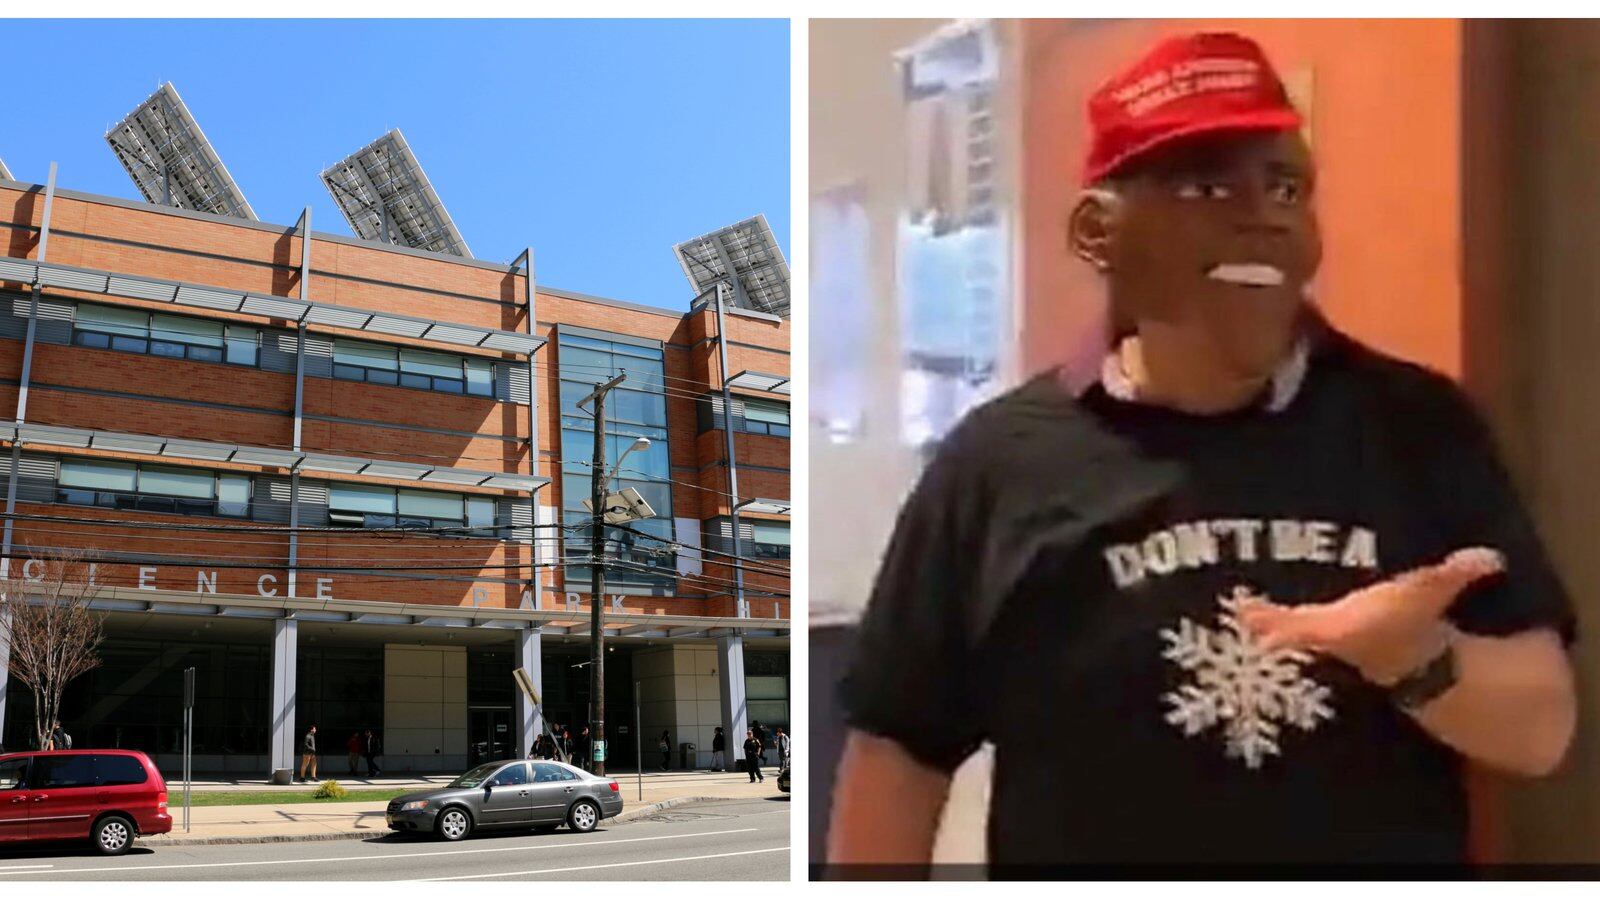 A teacher's Halloween costume, which included a mask of Barack Obama and a "Make America Great Again" hat, has sparked debate months later at Newark's prestigious Science Park High School. (School photo: Patrick Wall/Chalkbeat; teacher photo provided to Chalkbeat.)